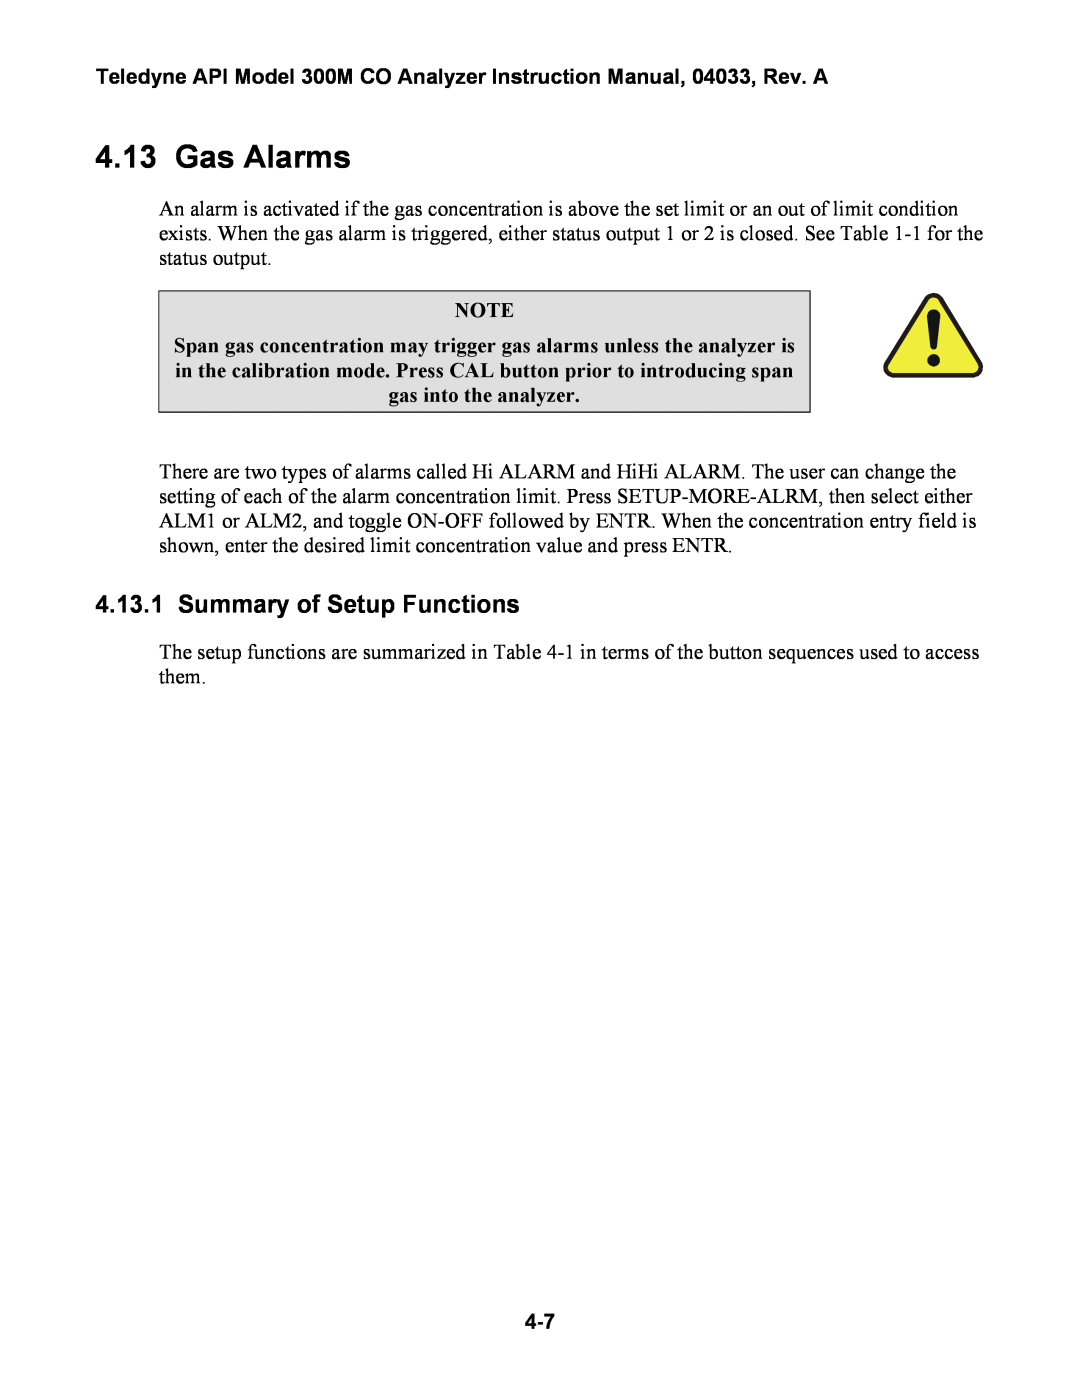 Teledyne 300M instruction manual Gas Alarms, Summary of Setup Functions 